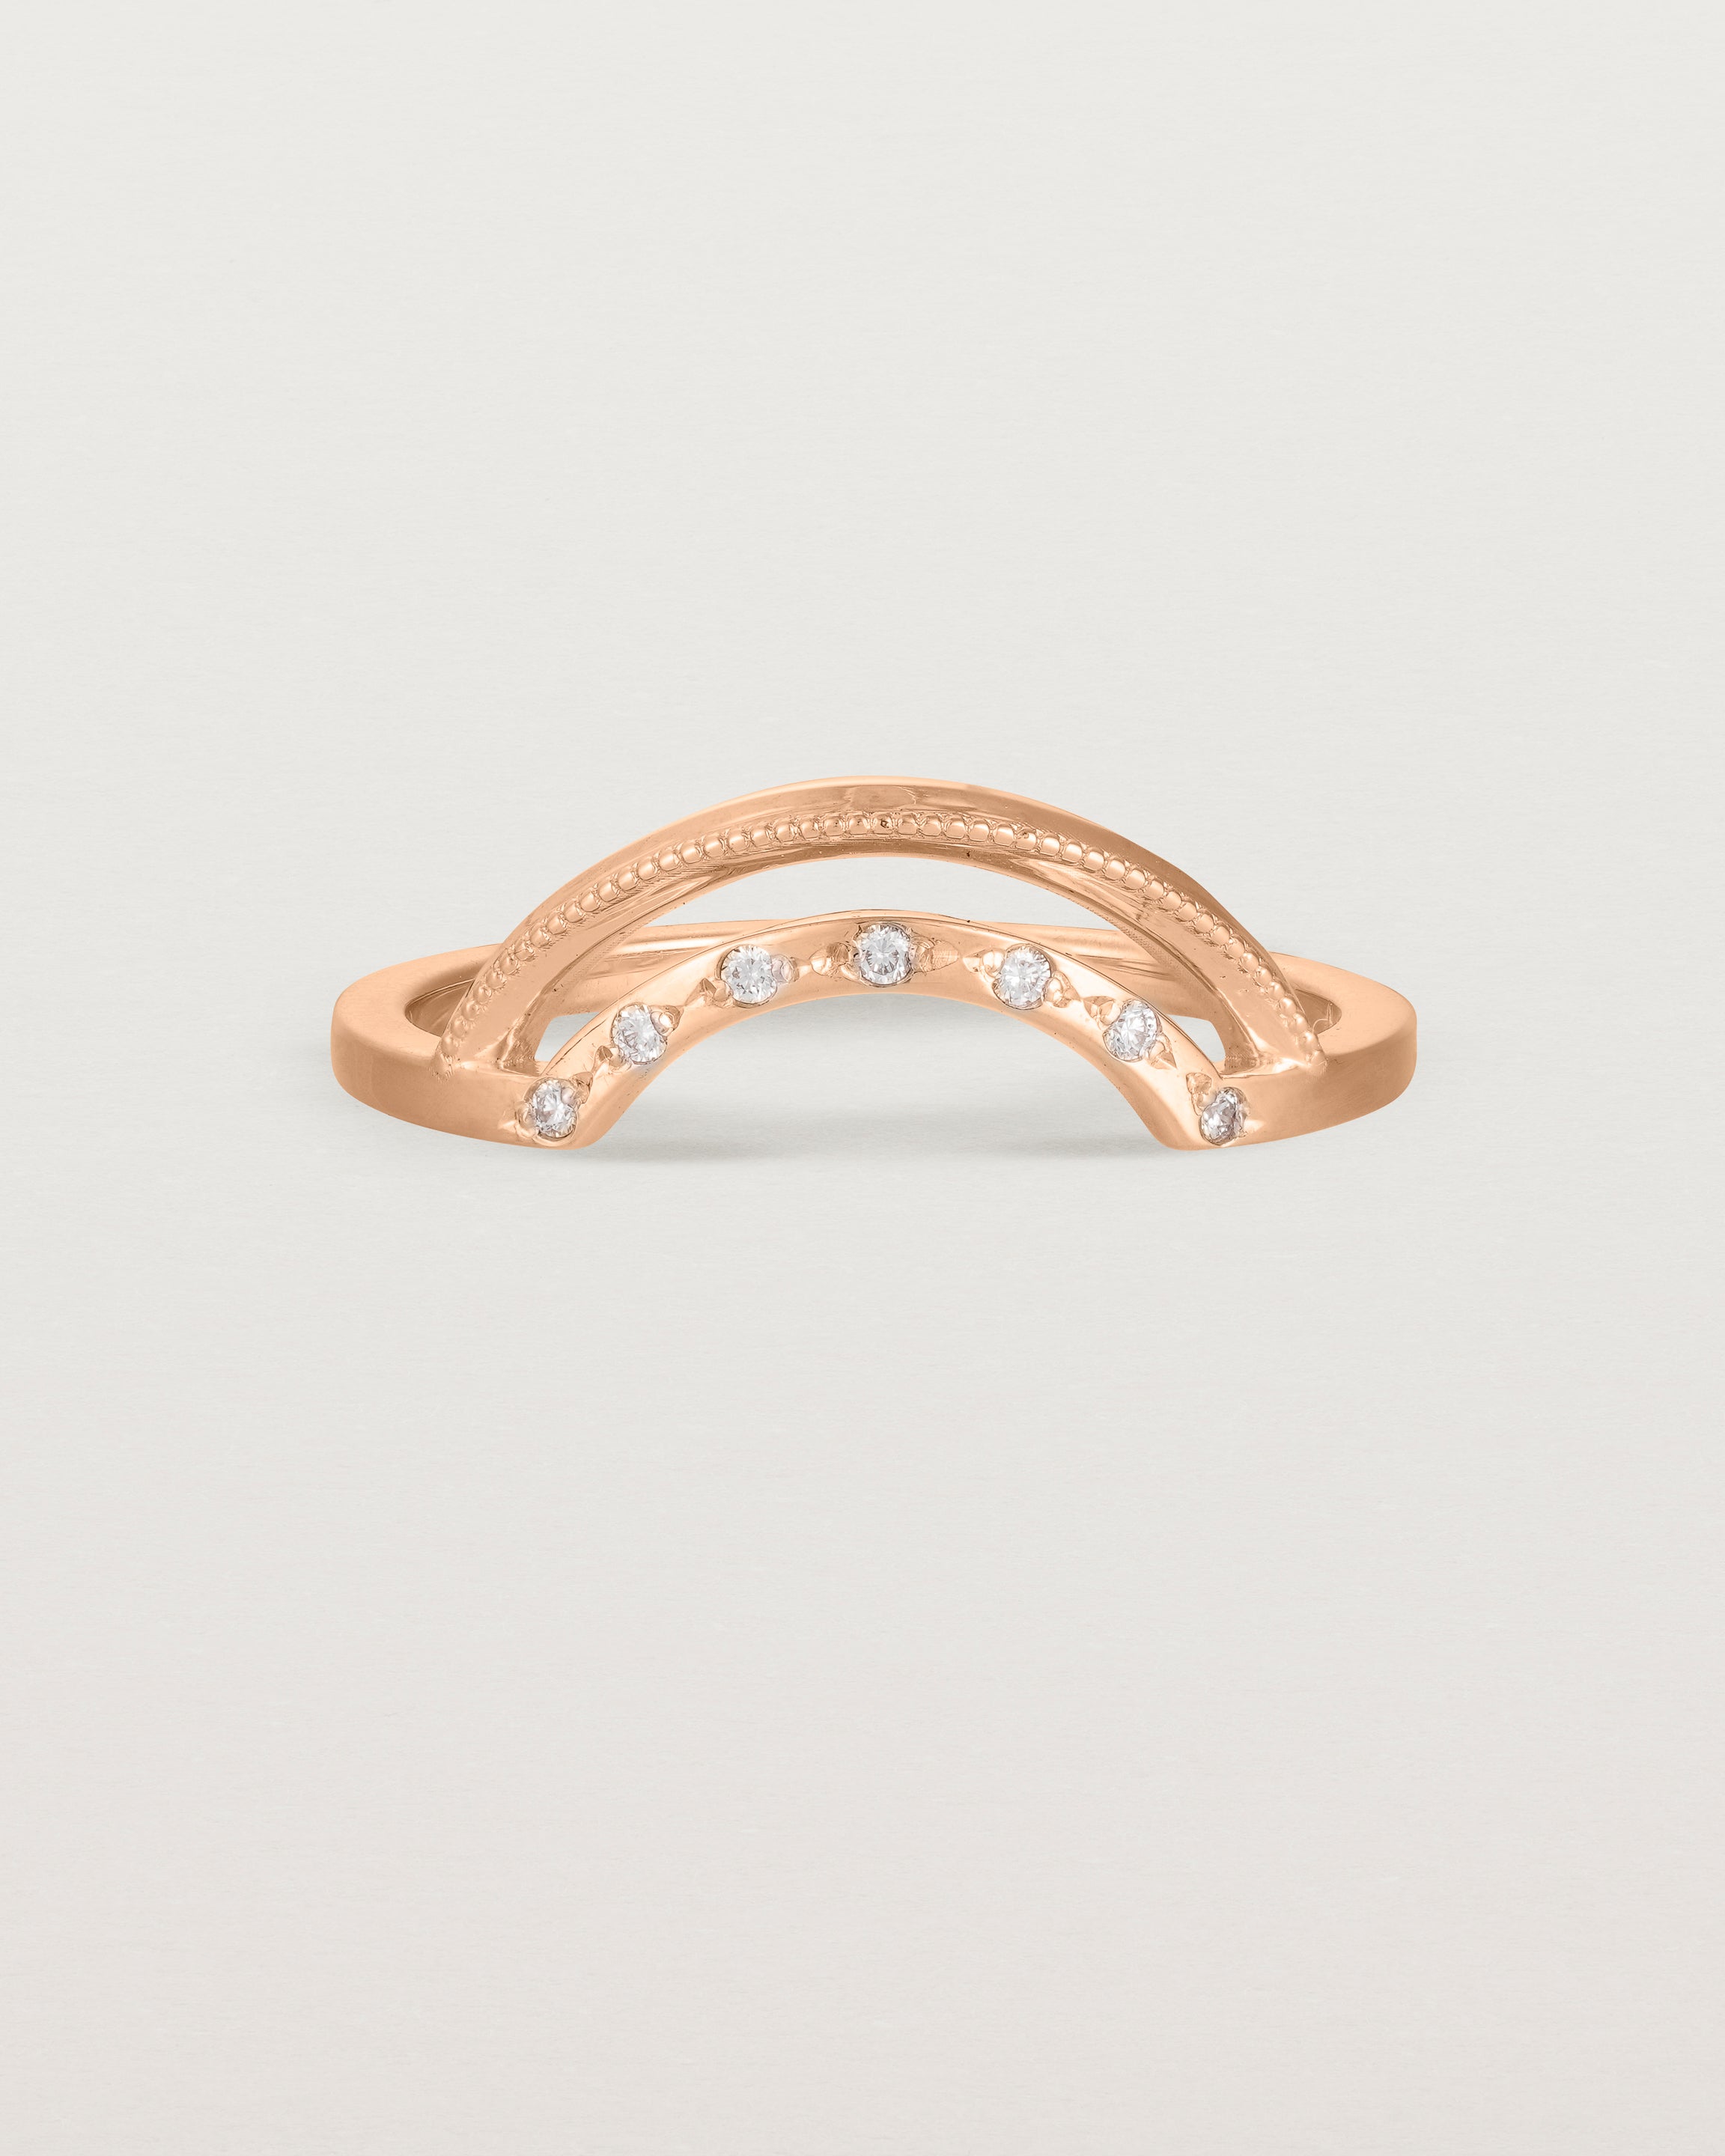 Fit four of a double arc crown ring with white diamonds adoring the inner arc - crafted in rose gold.